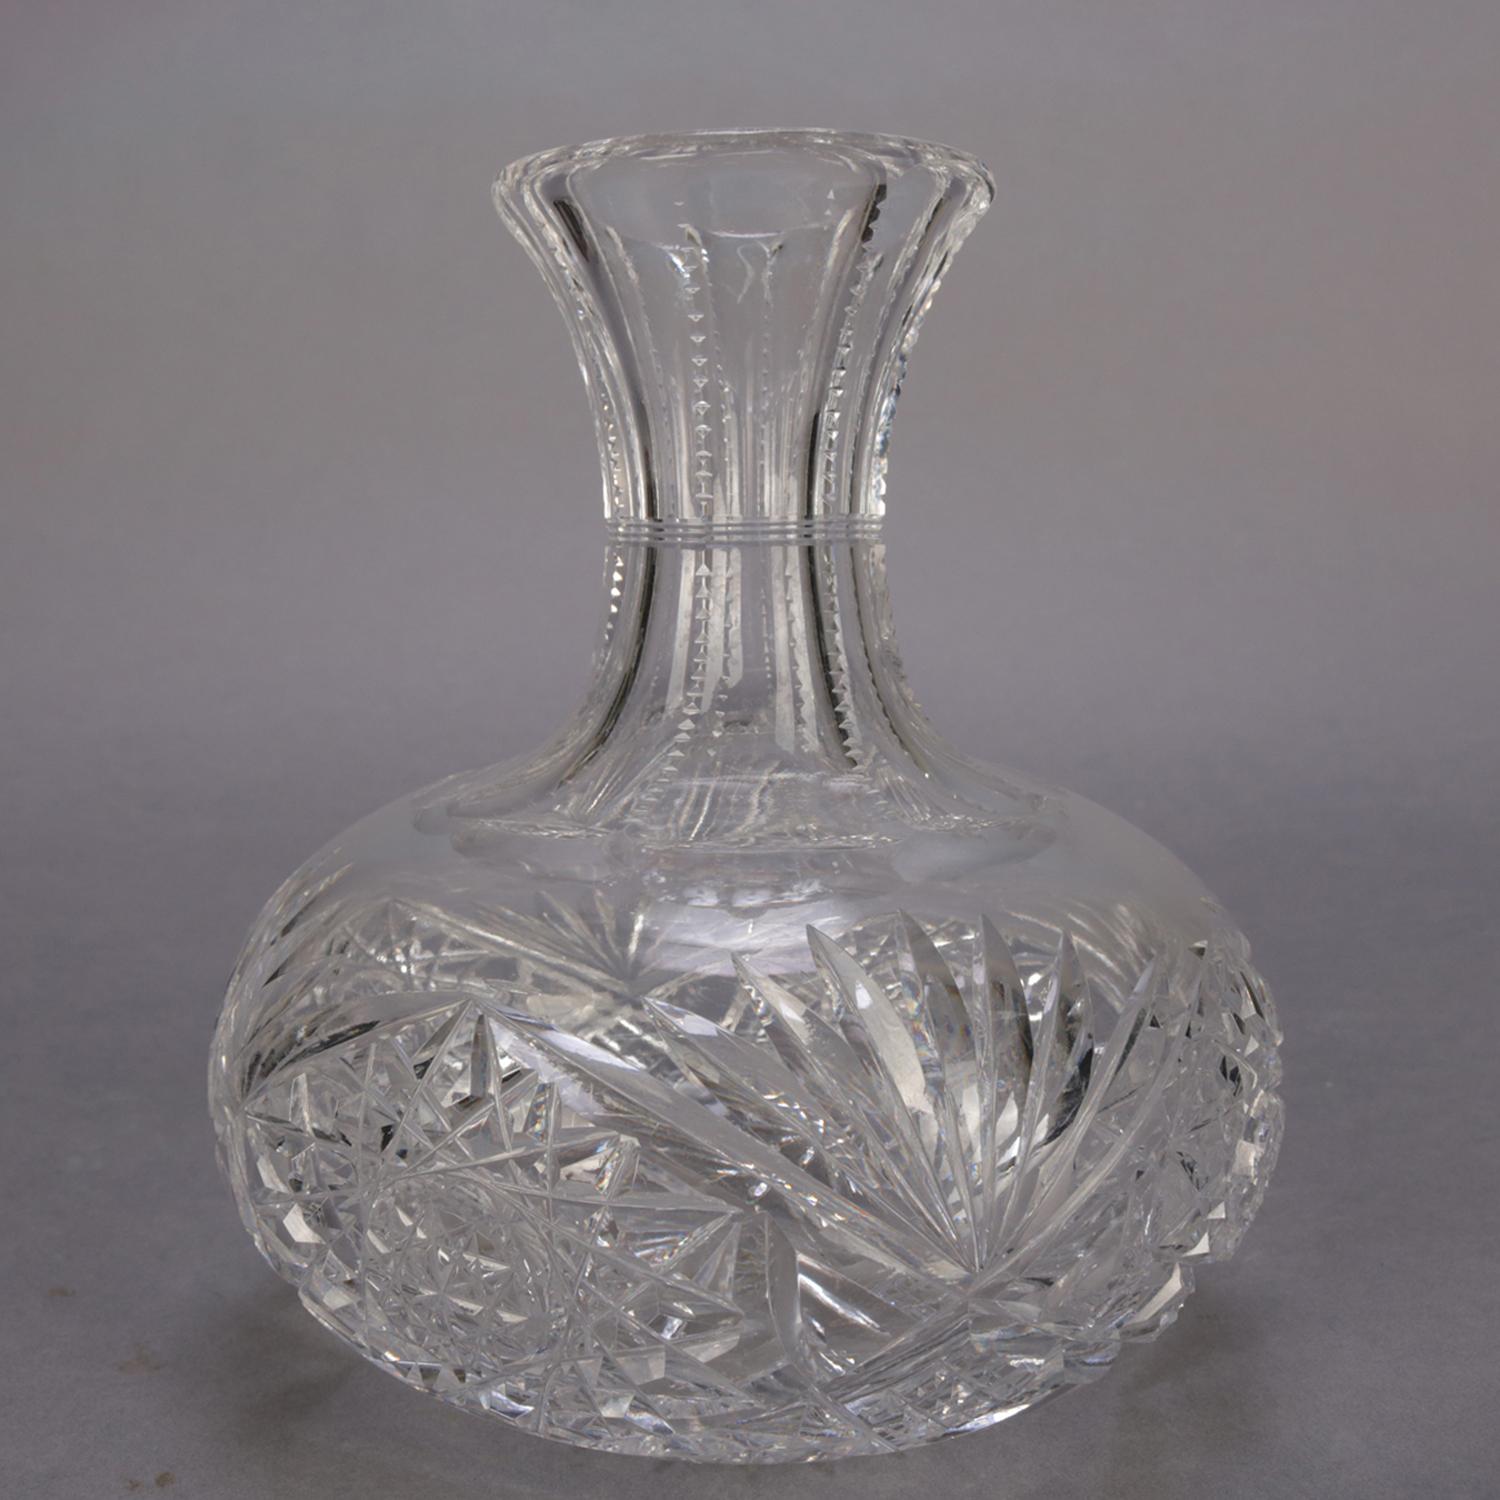 A Hawkes School American Brilliant Cut Glass wine carafe features squat cut crystal ball with ribbed neck terminating in flared mouth, 20th century.

Measures: 7.25